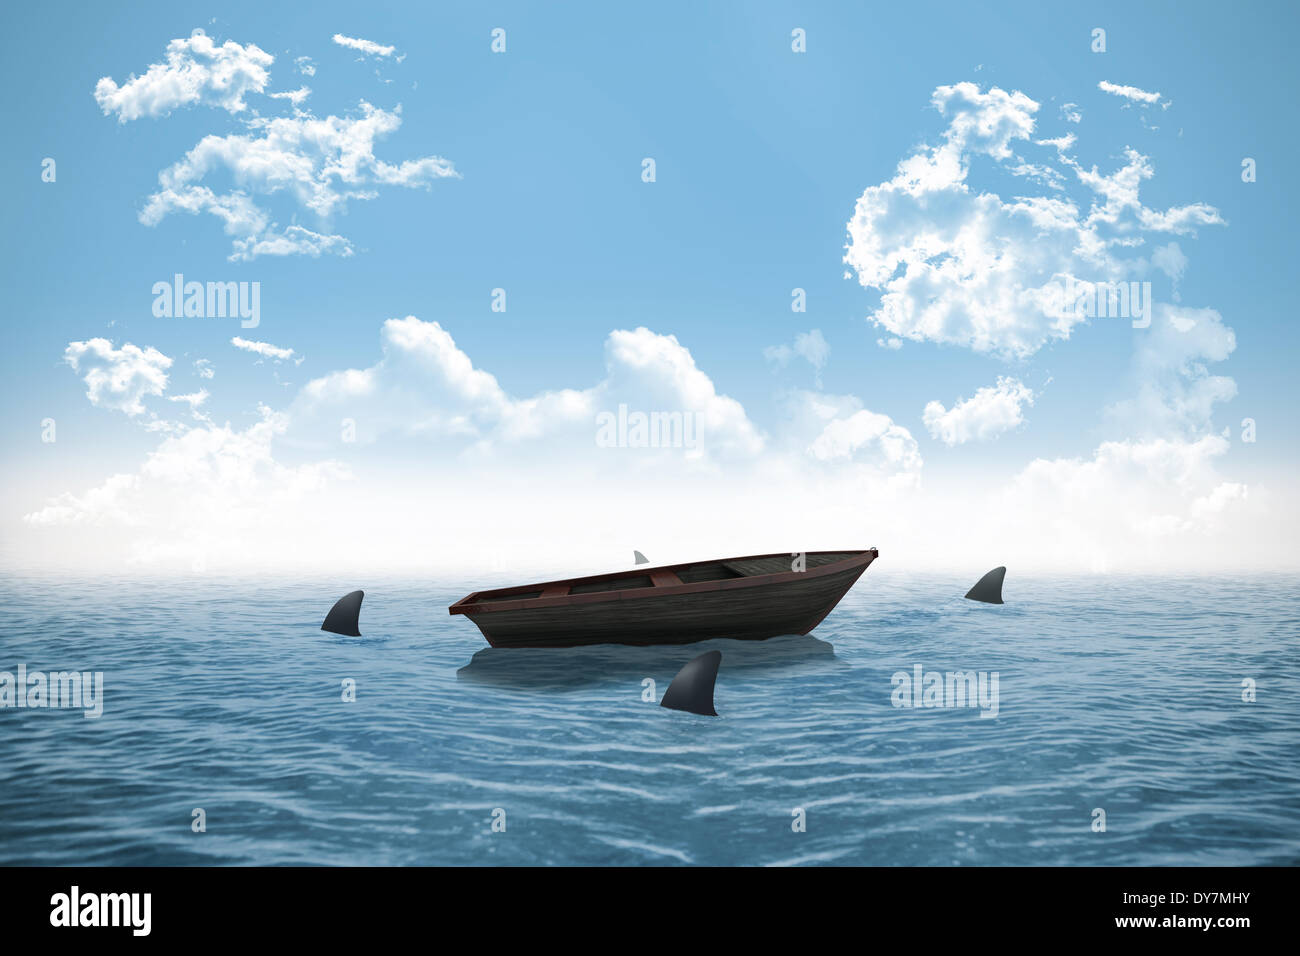 Sharks circling small boat in the ocean Stock Photo